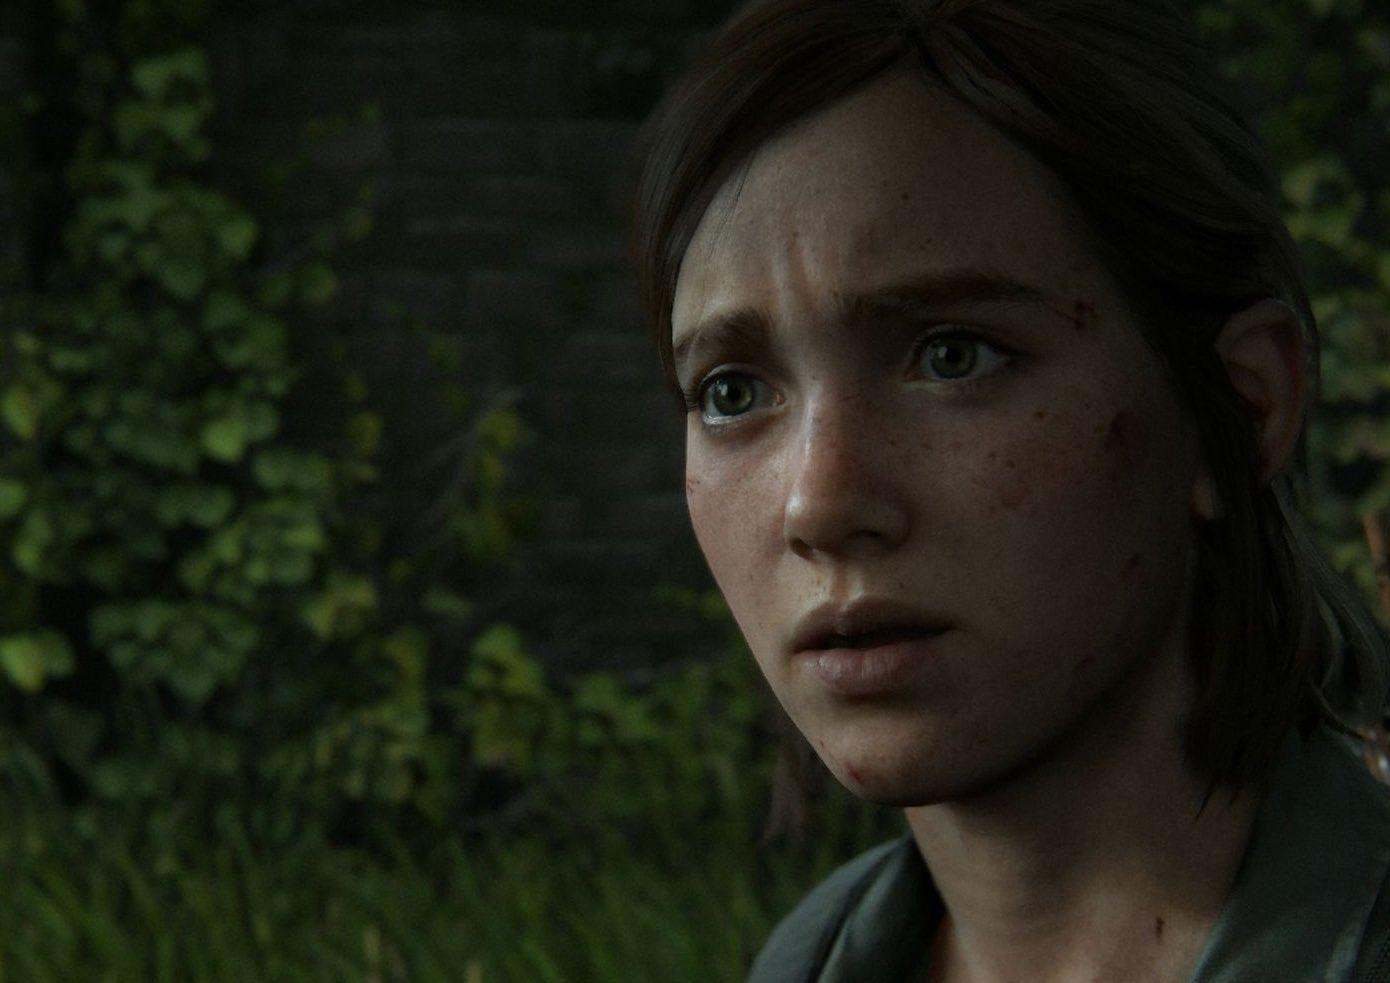 The Last of Us 3 Should Bring Ellie's Story to a Close